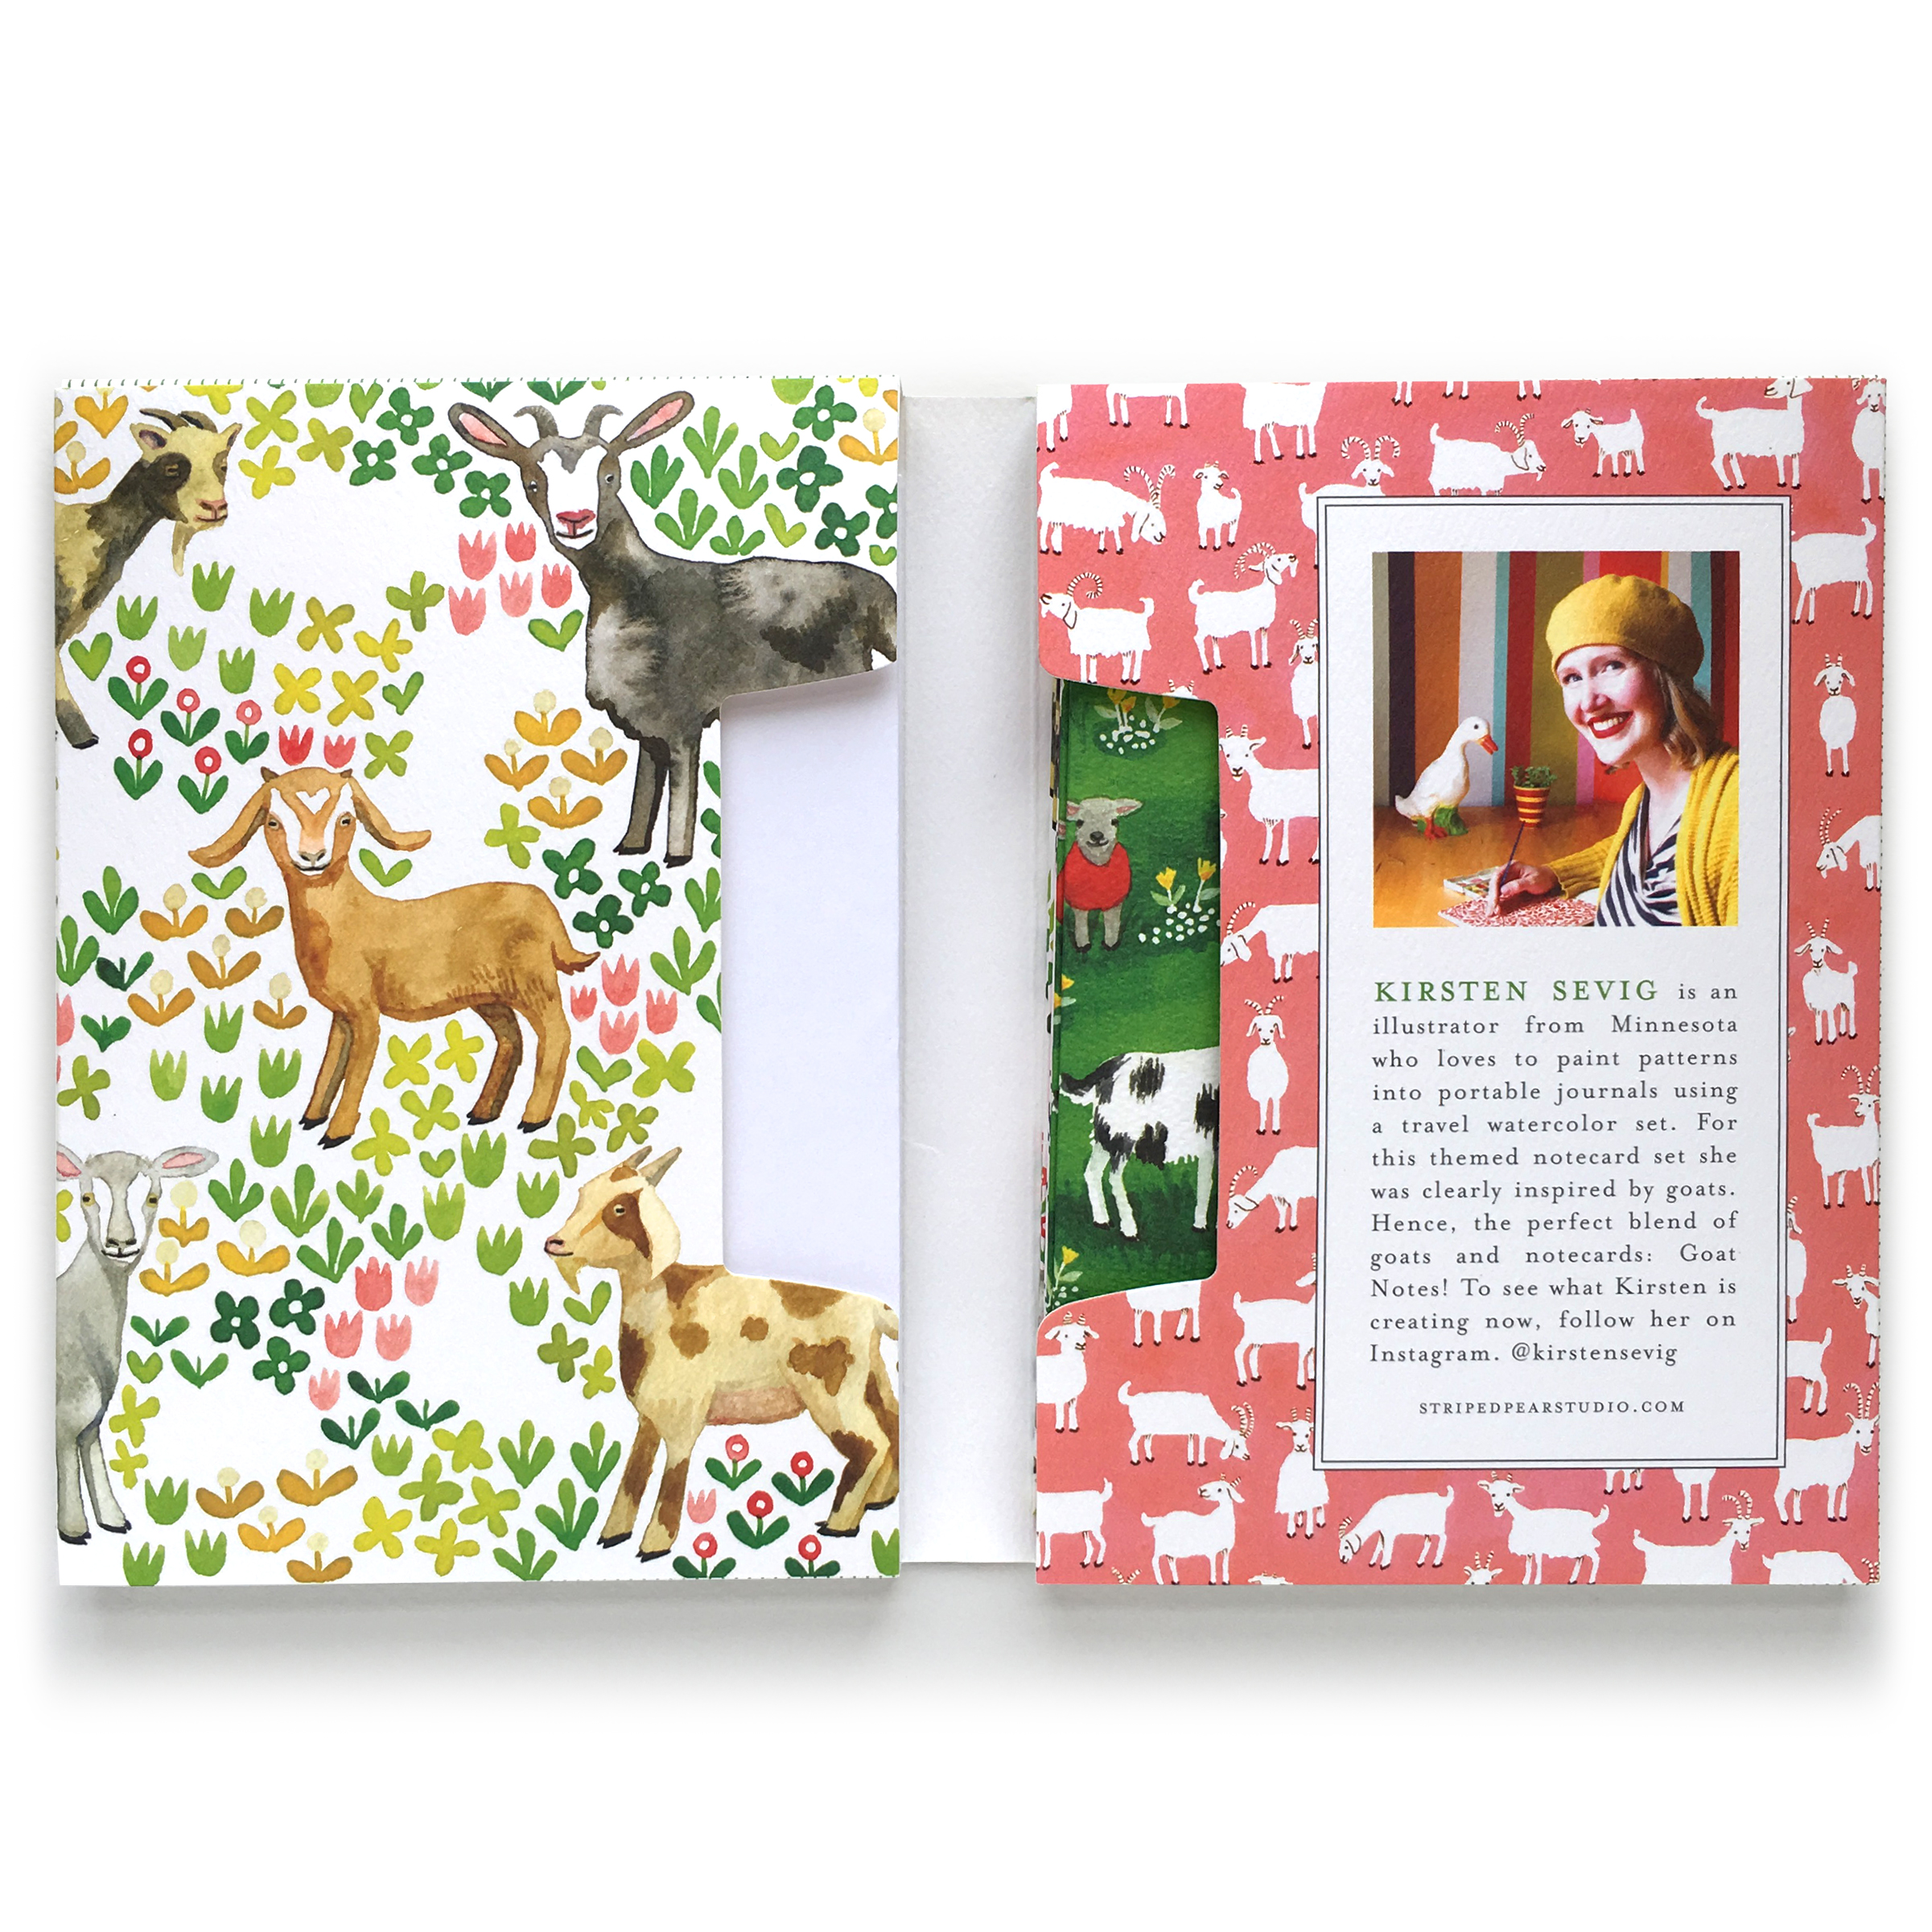 NEW Goat Notes Notecards Set 